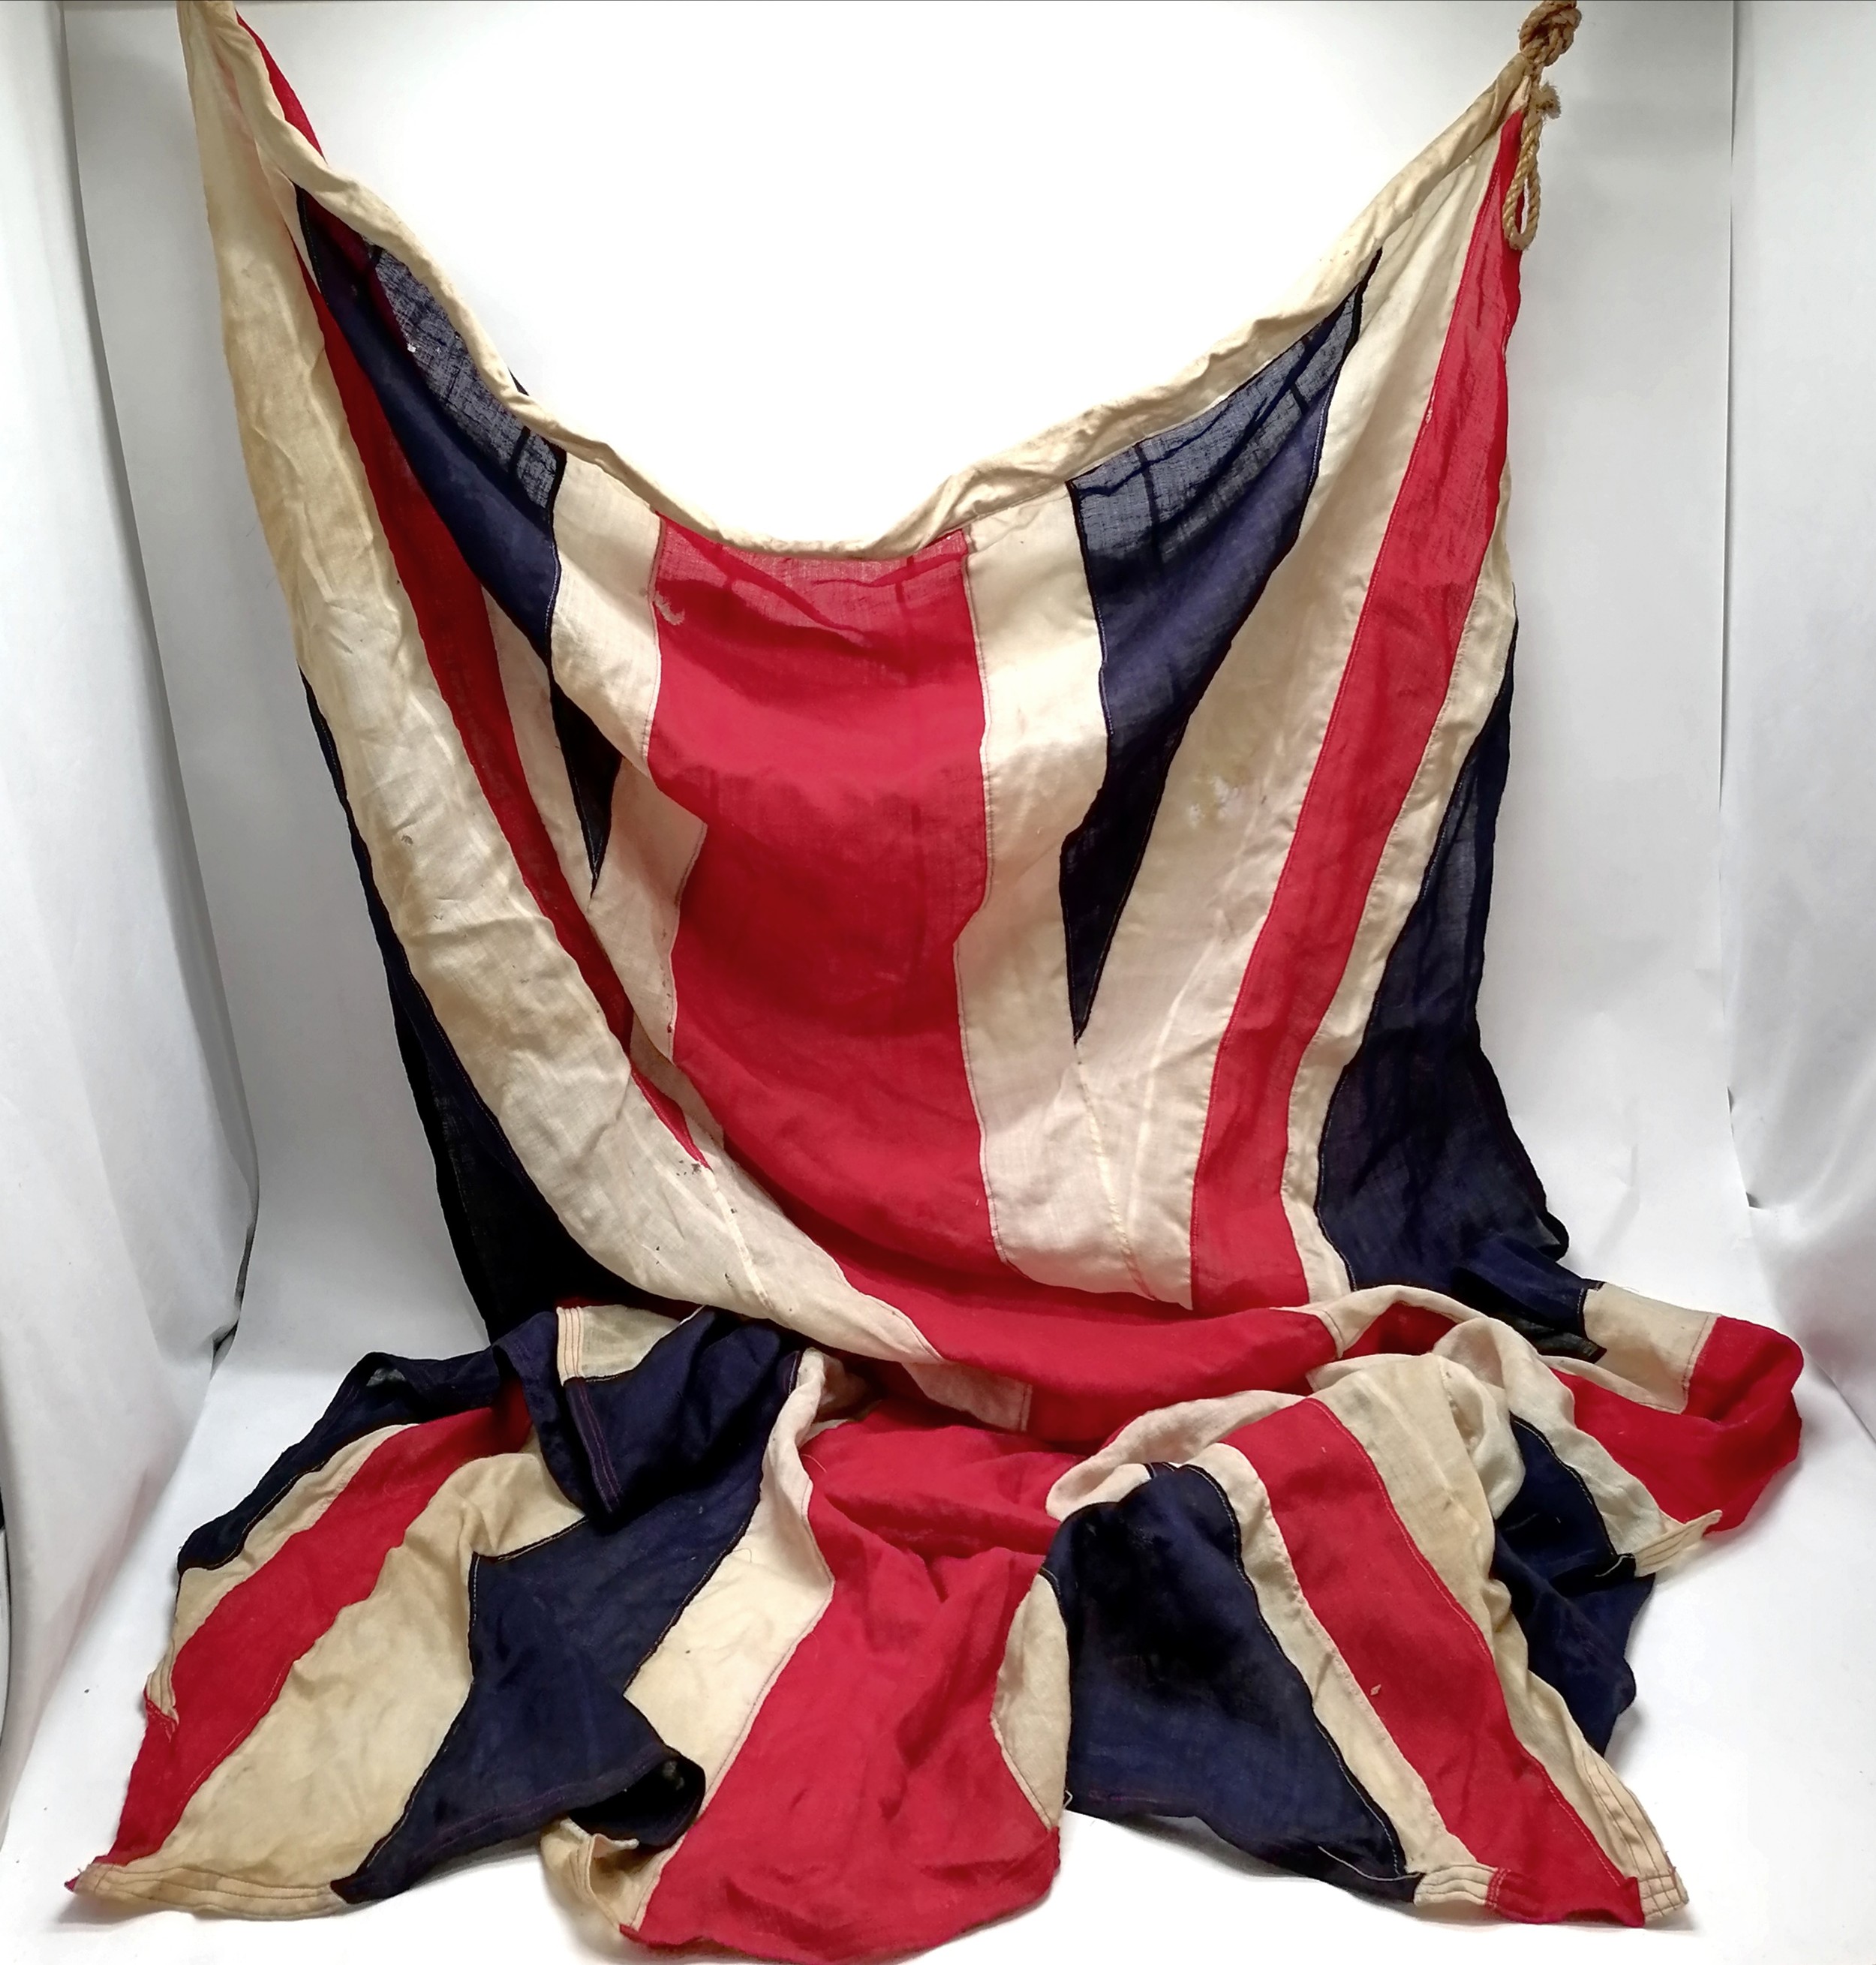 Large Union Jack flag - 130cm x 280cm and has some holes - Image 5 of 5